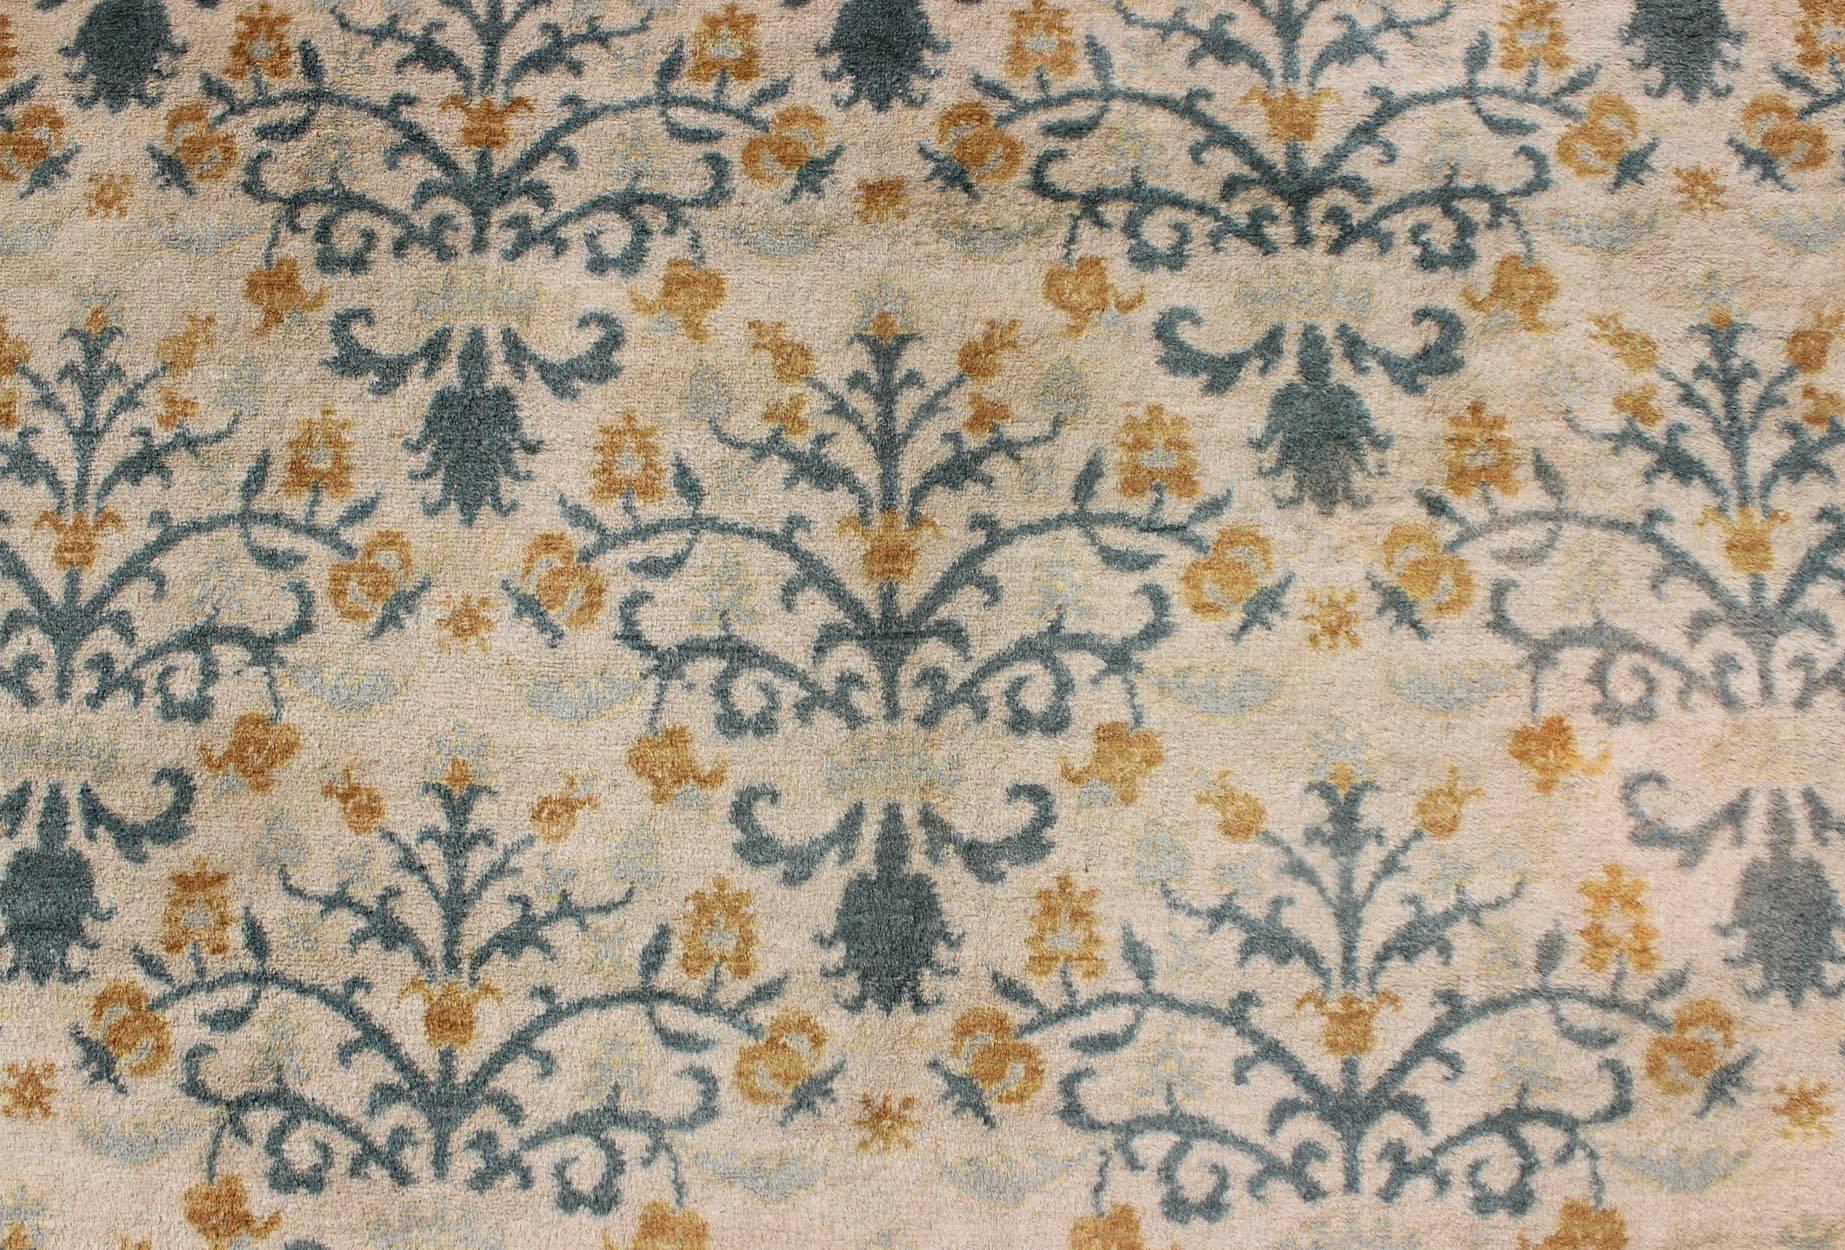 Large and colorful antique Spanish rug with all-over design in cream, coral, blue, rug 16-0801, country of origin / type: Spain / Spanish, circa 1920.

Large and Colorful Antique Spanish Rug with All-Over Design in Cream, Coral, Blue green, yellow